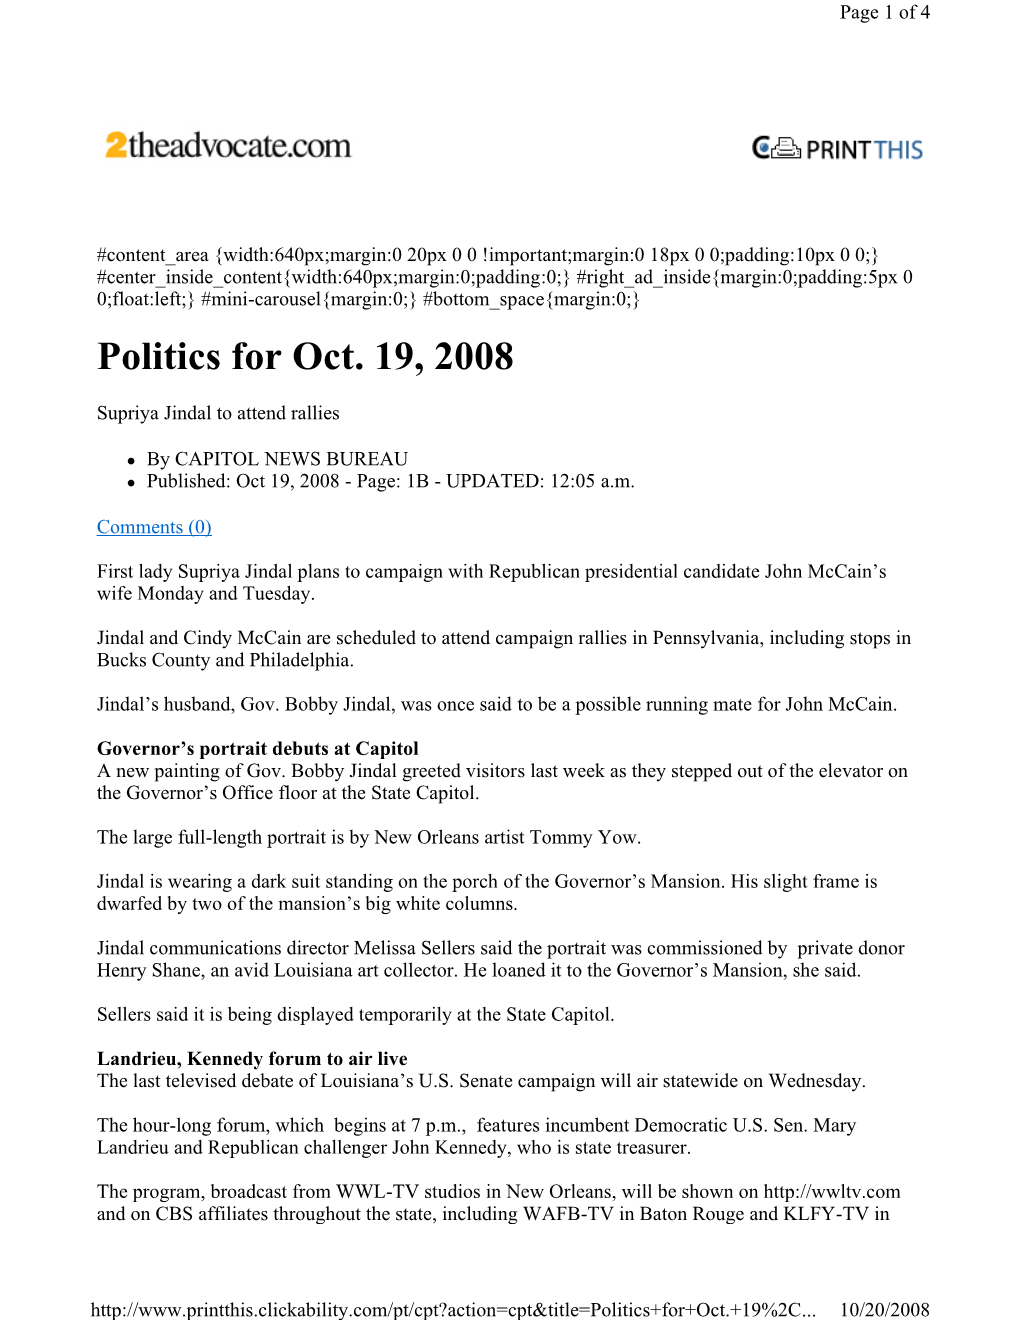 10.19.08 First Lady Supriya Jindal Plans to Campaign With